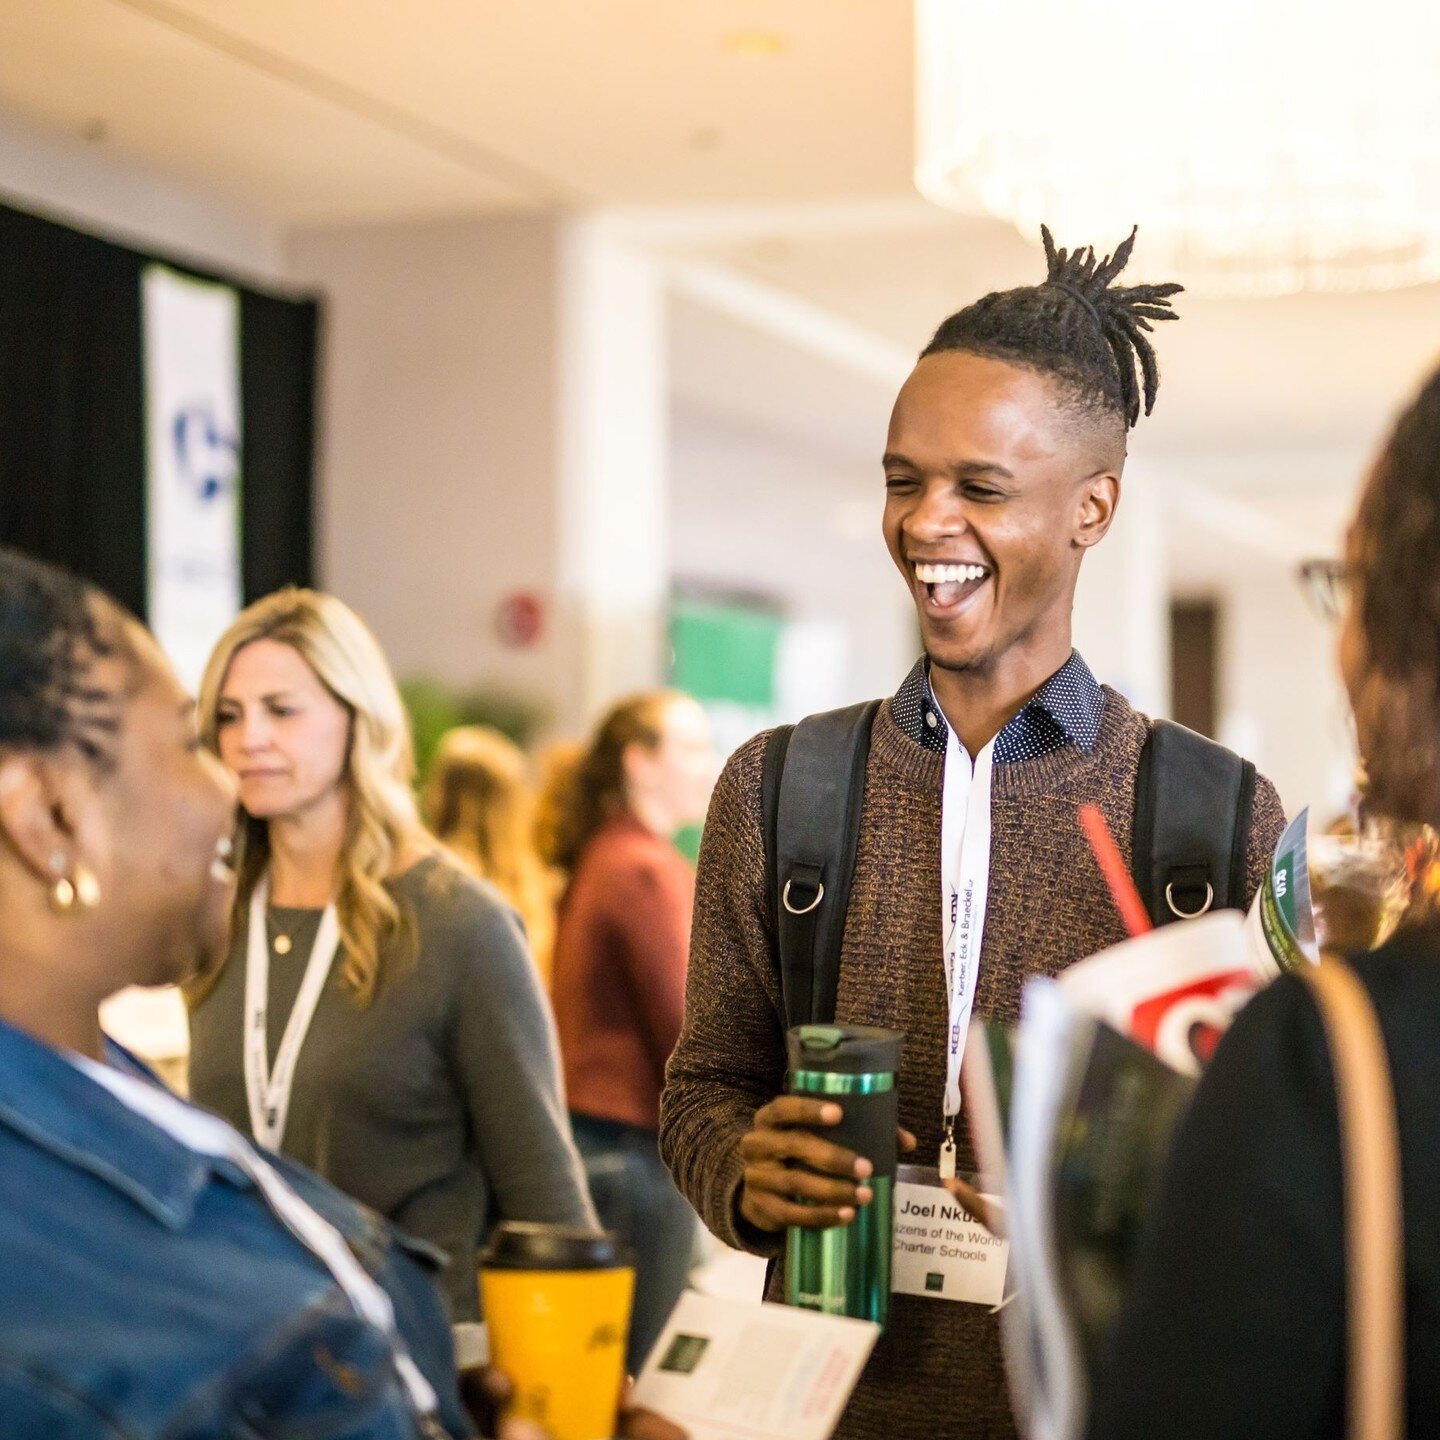 Start your week with a smile. That great moment when conference attendees truly connect. #conferenceplanner #nonprofitevents #connection #events #eventplanner #expo